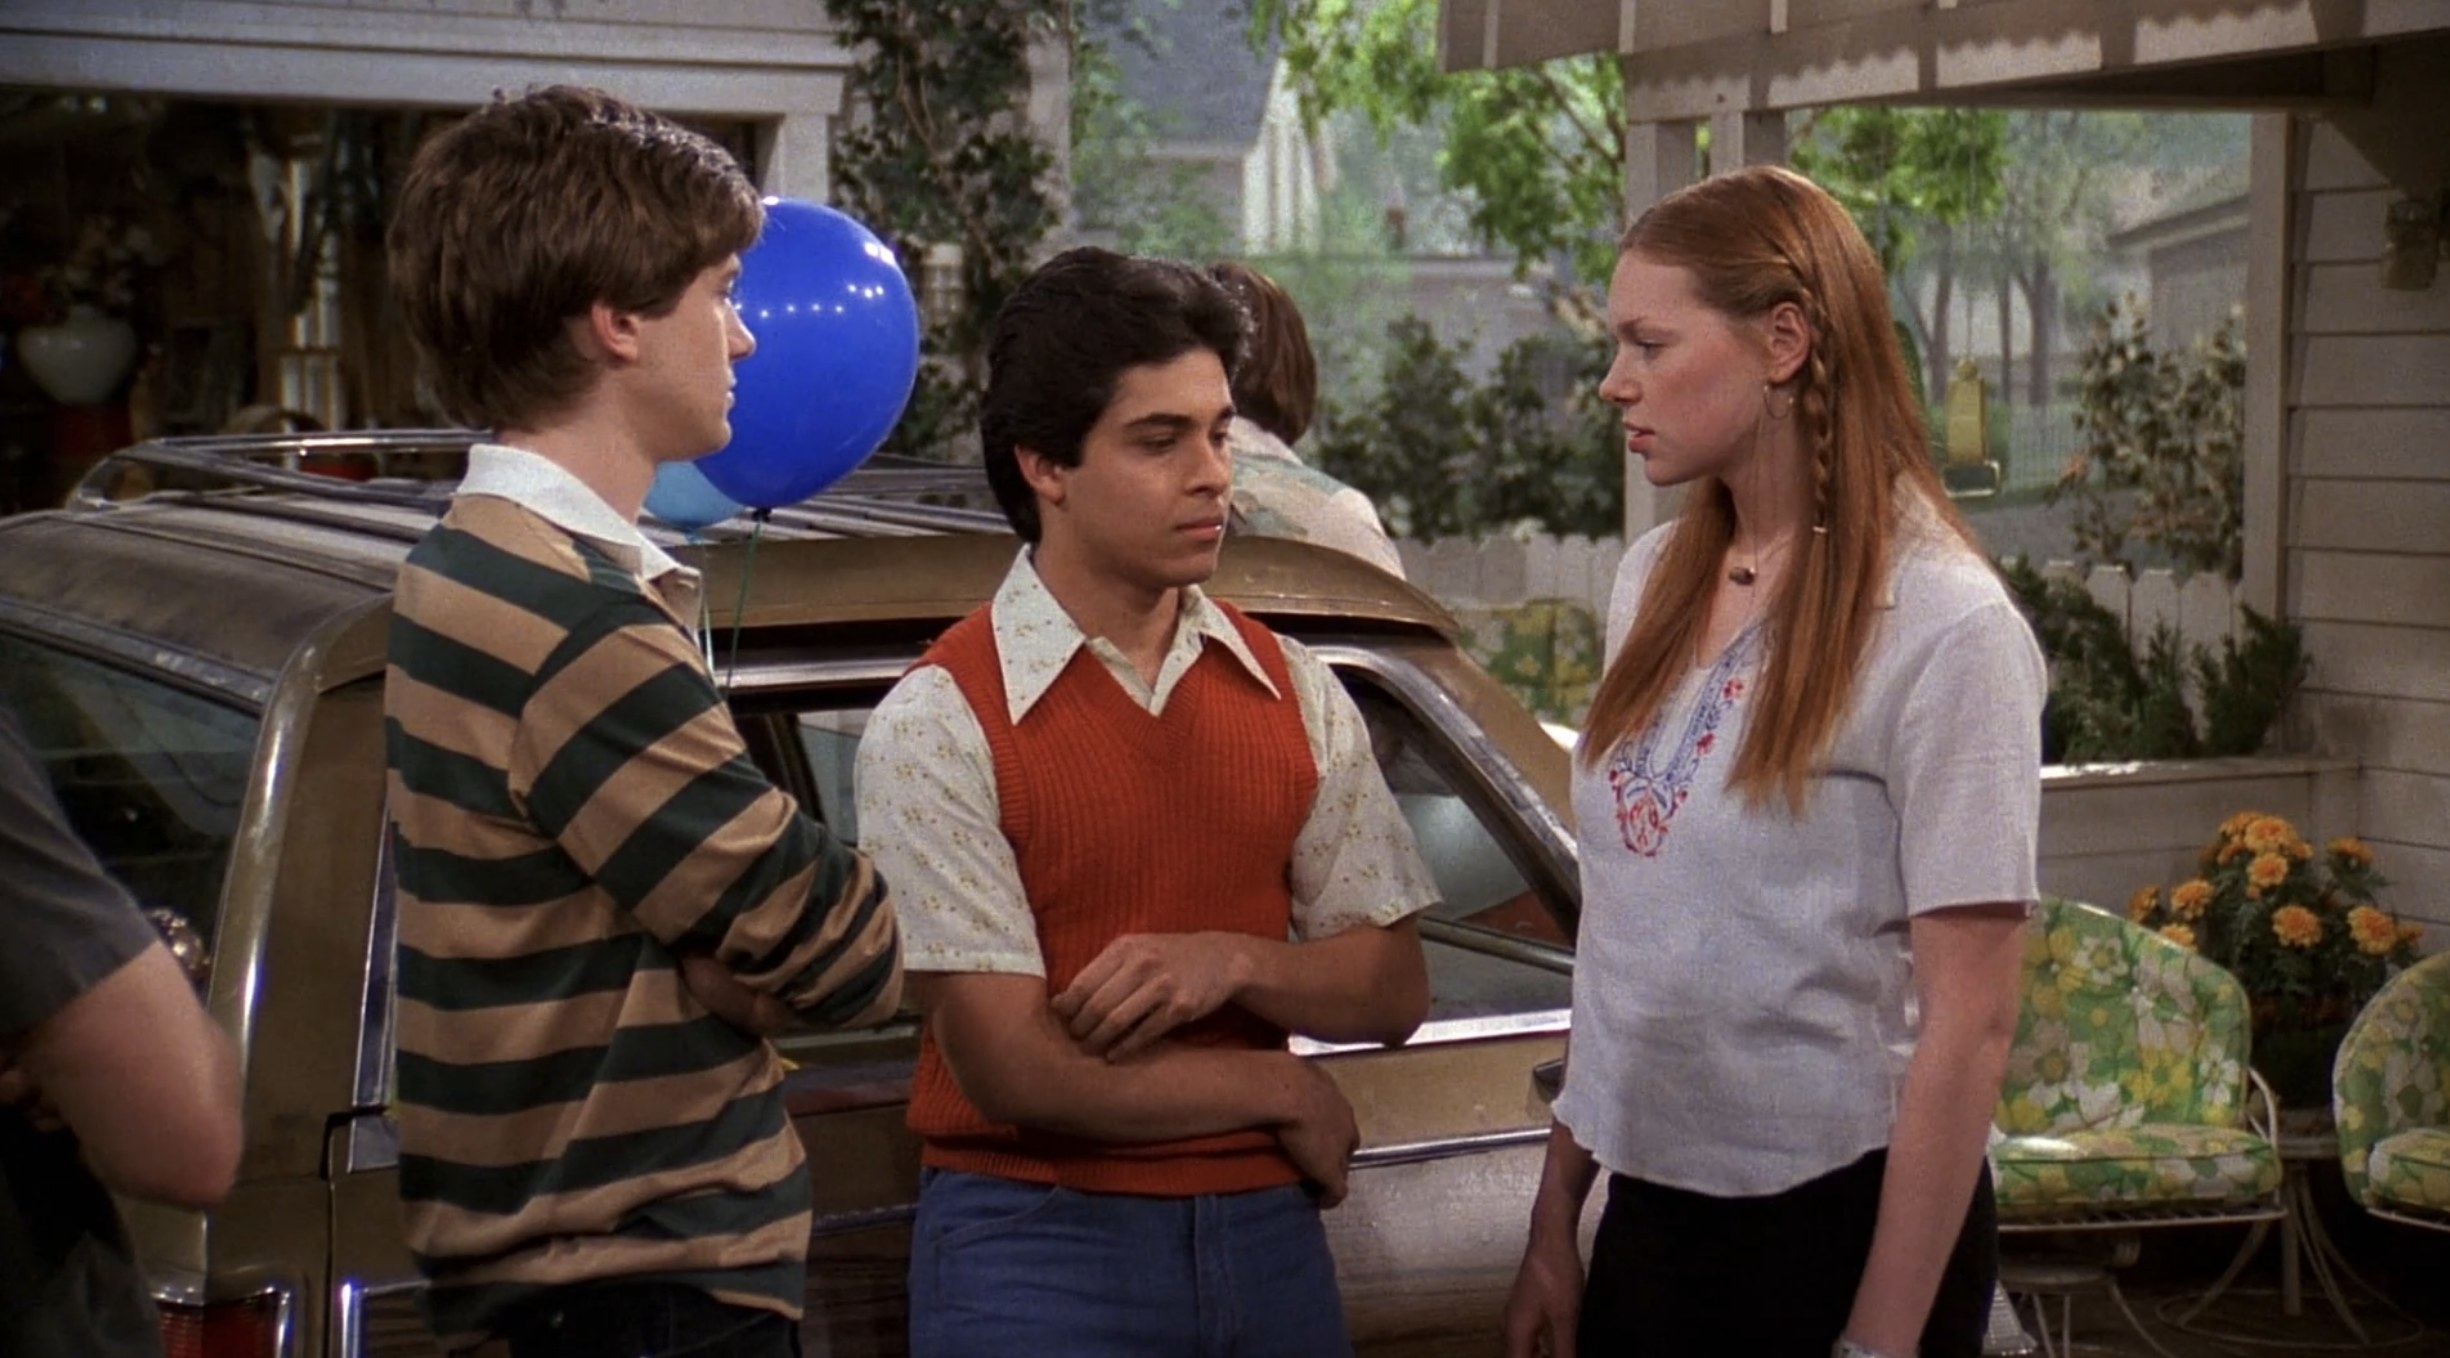 Eric and Donna look upset as Fez stands between them, holding a balloon